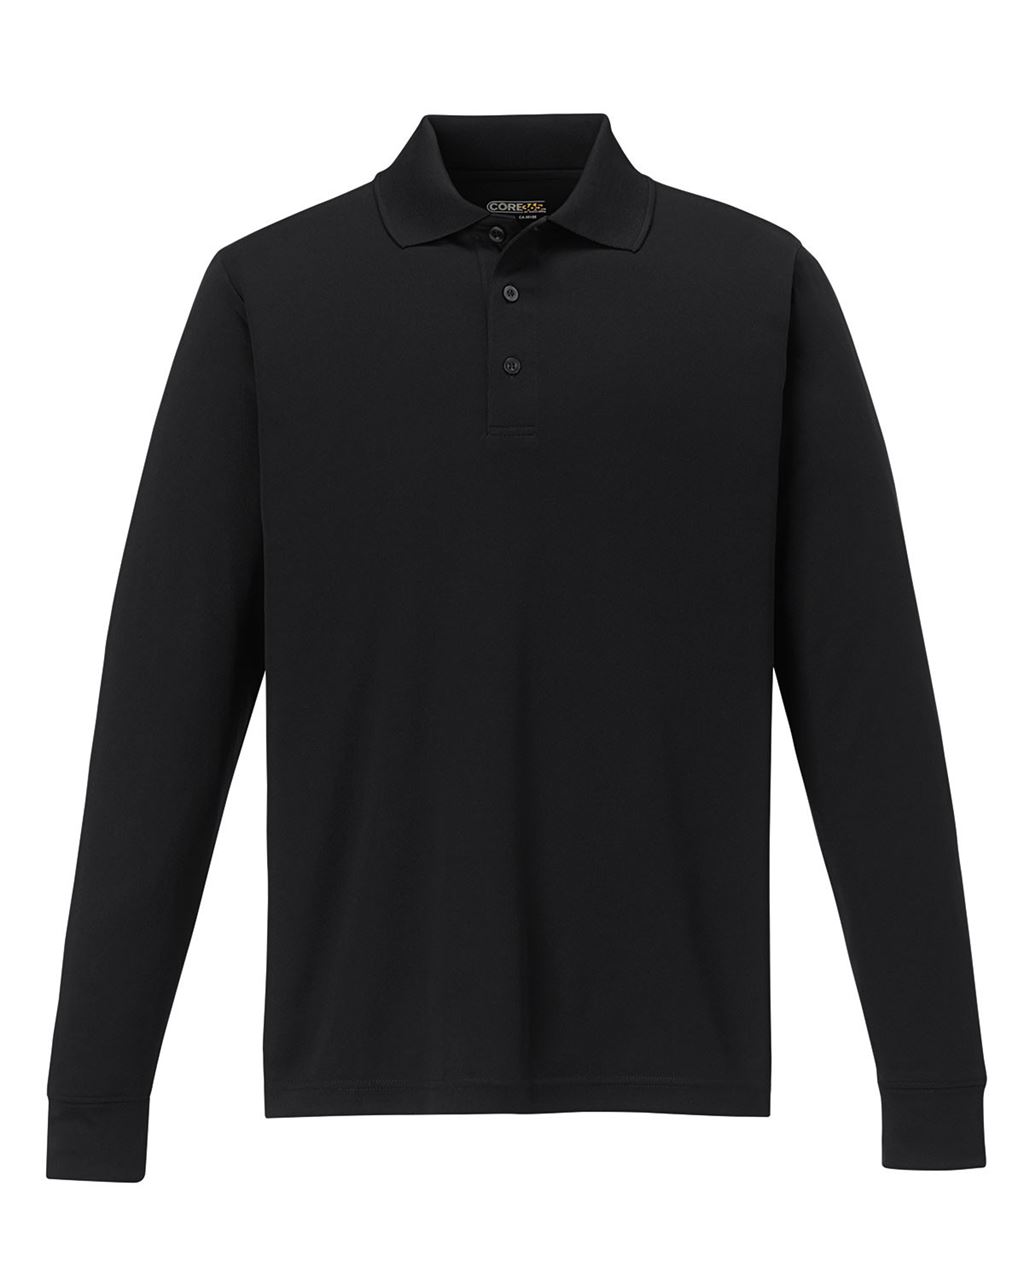 Picture of CORE365 Men's Pinnacle Performance Long-Sleeve Piqué Polo